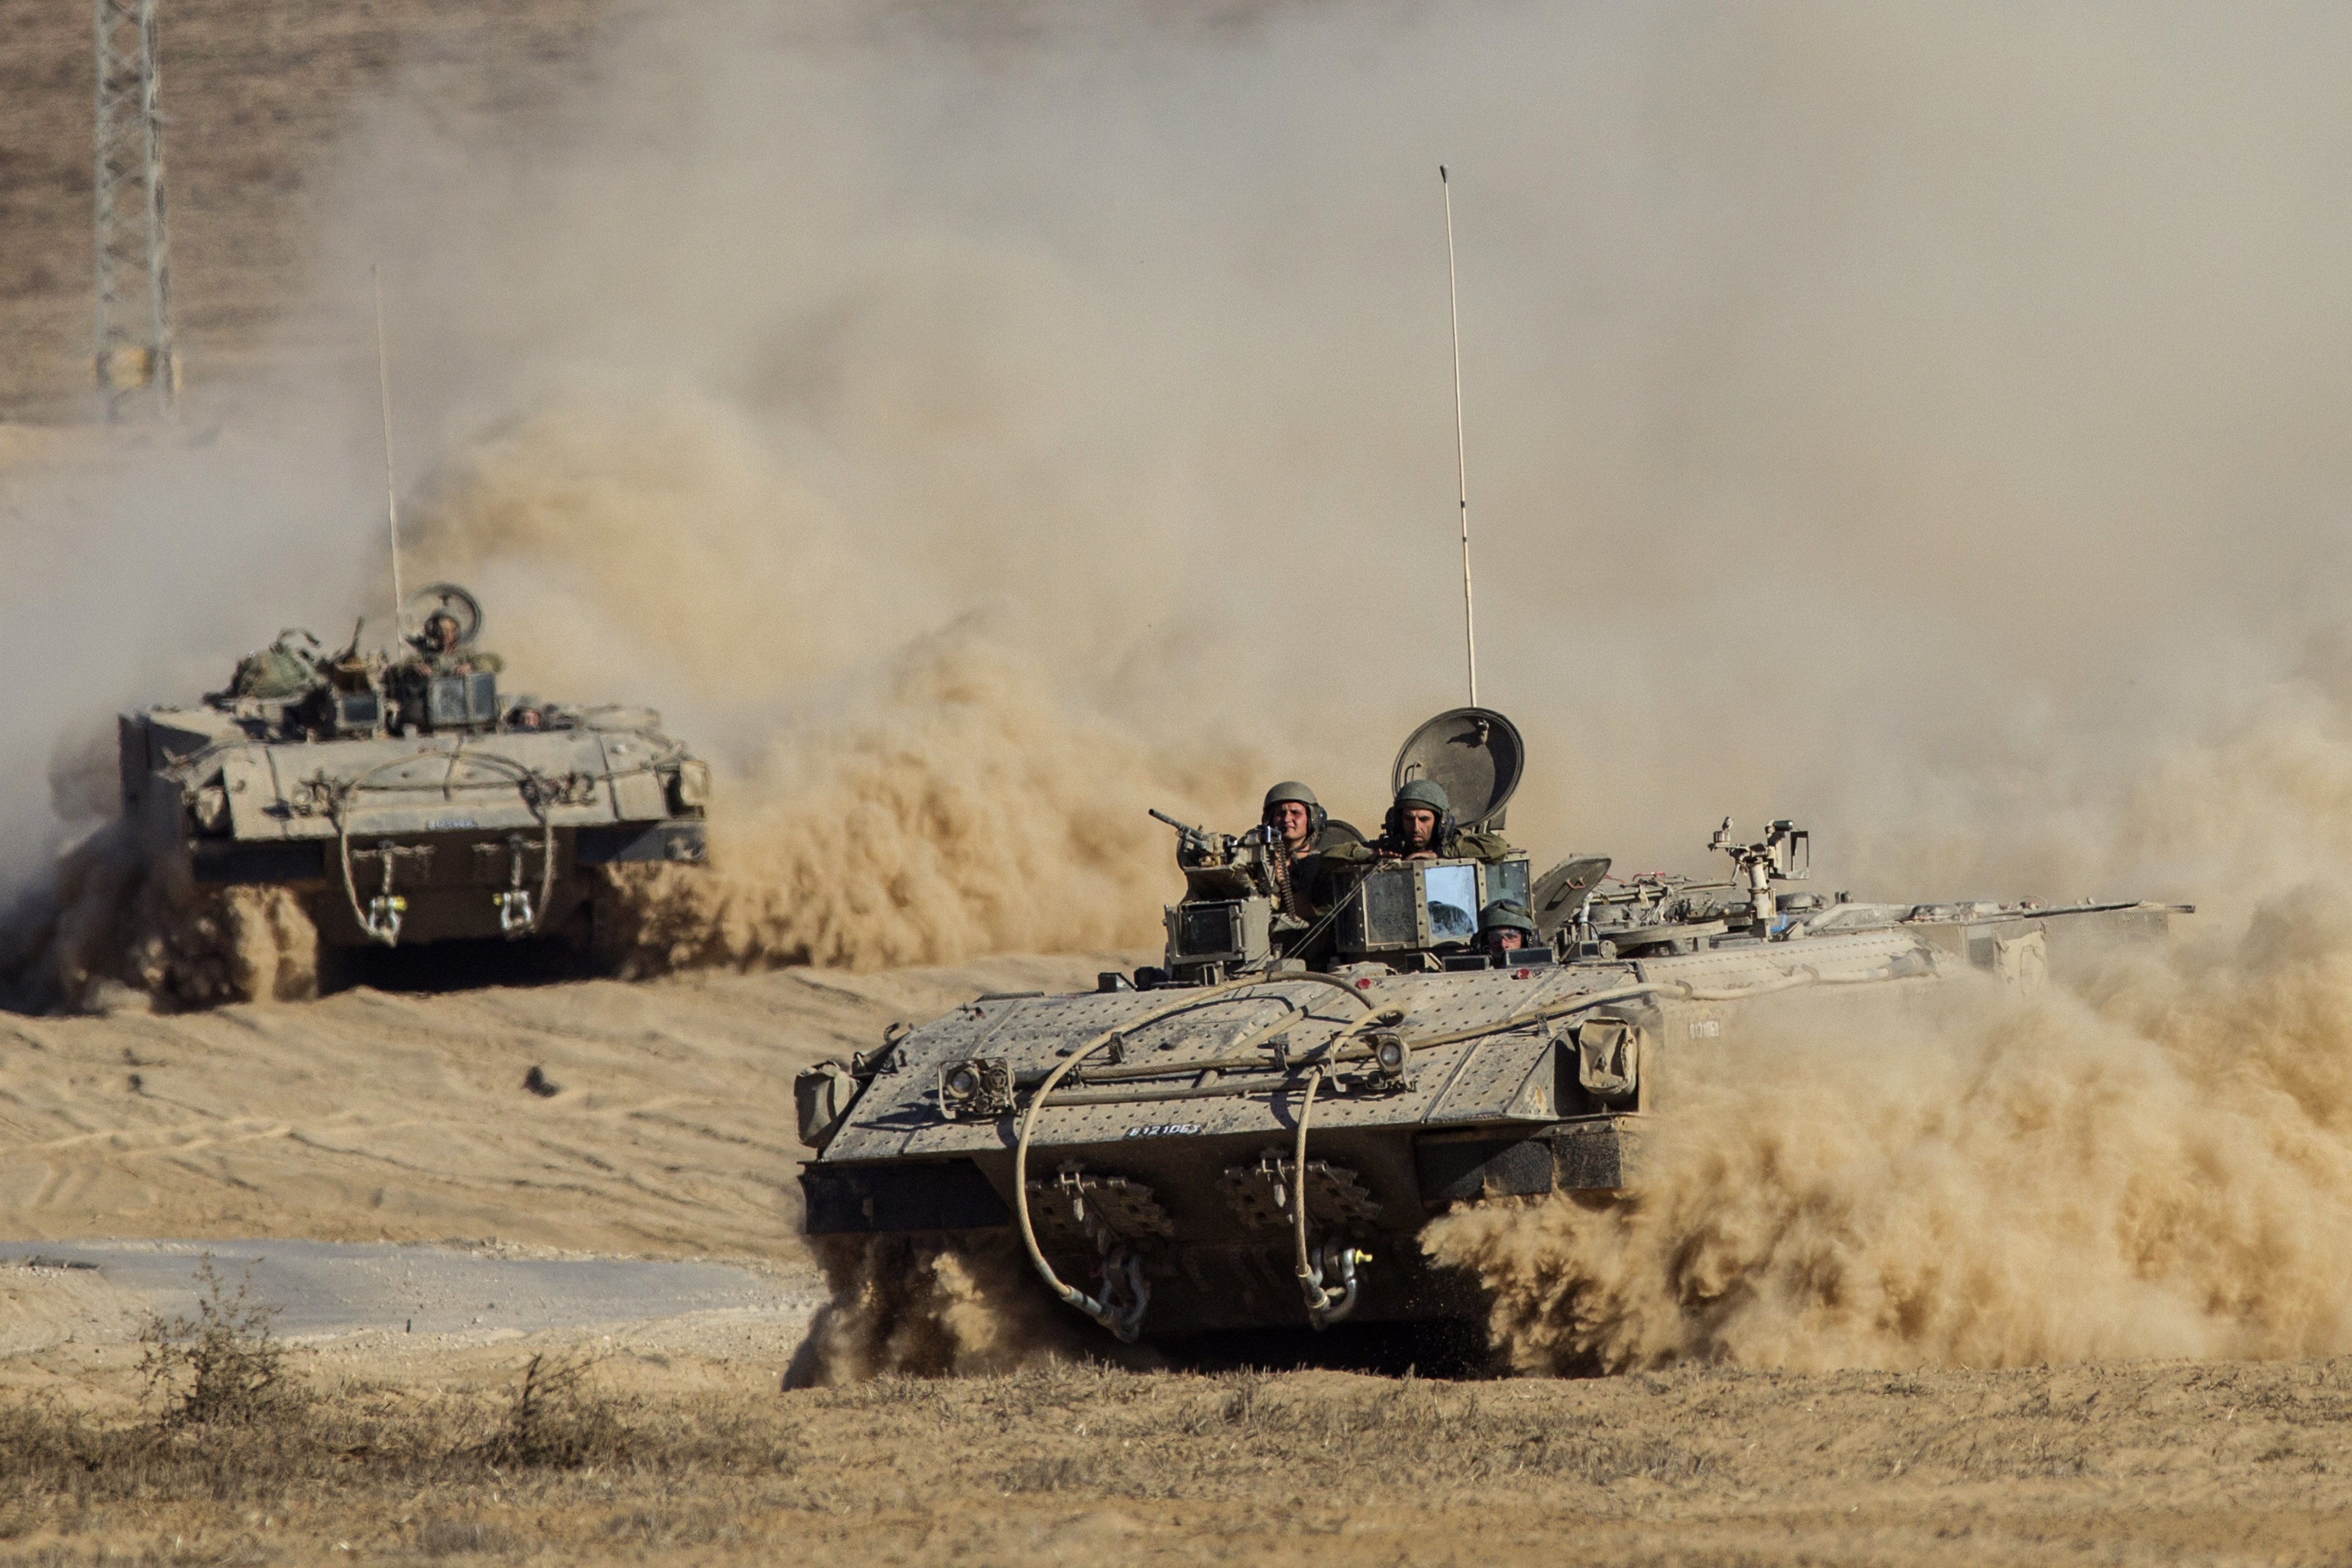 Israeli army armored personnel carriers (APC) move along Israel's border with the Gaza Strip on July 30, 2014. (JACK GUEZ&mdash;AFP/Getty Images)